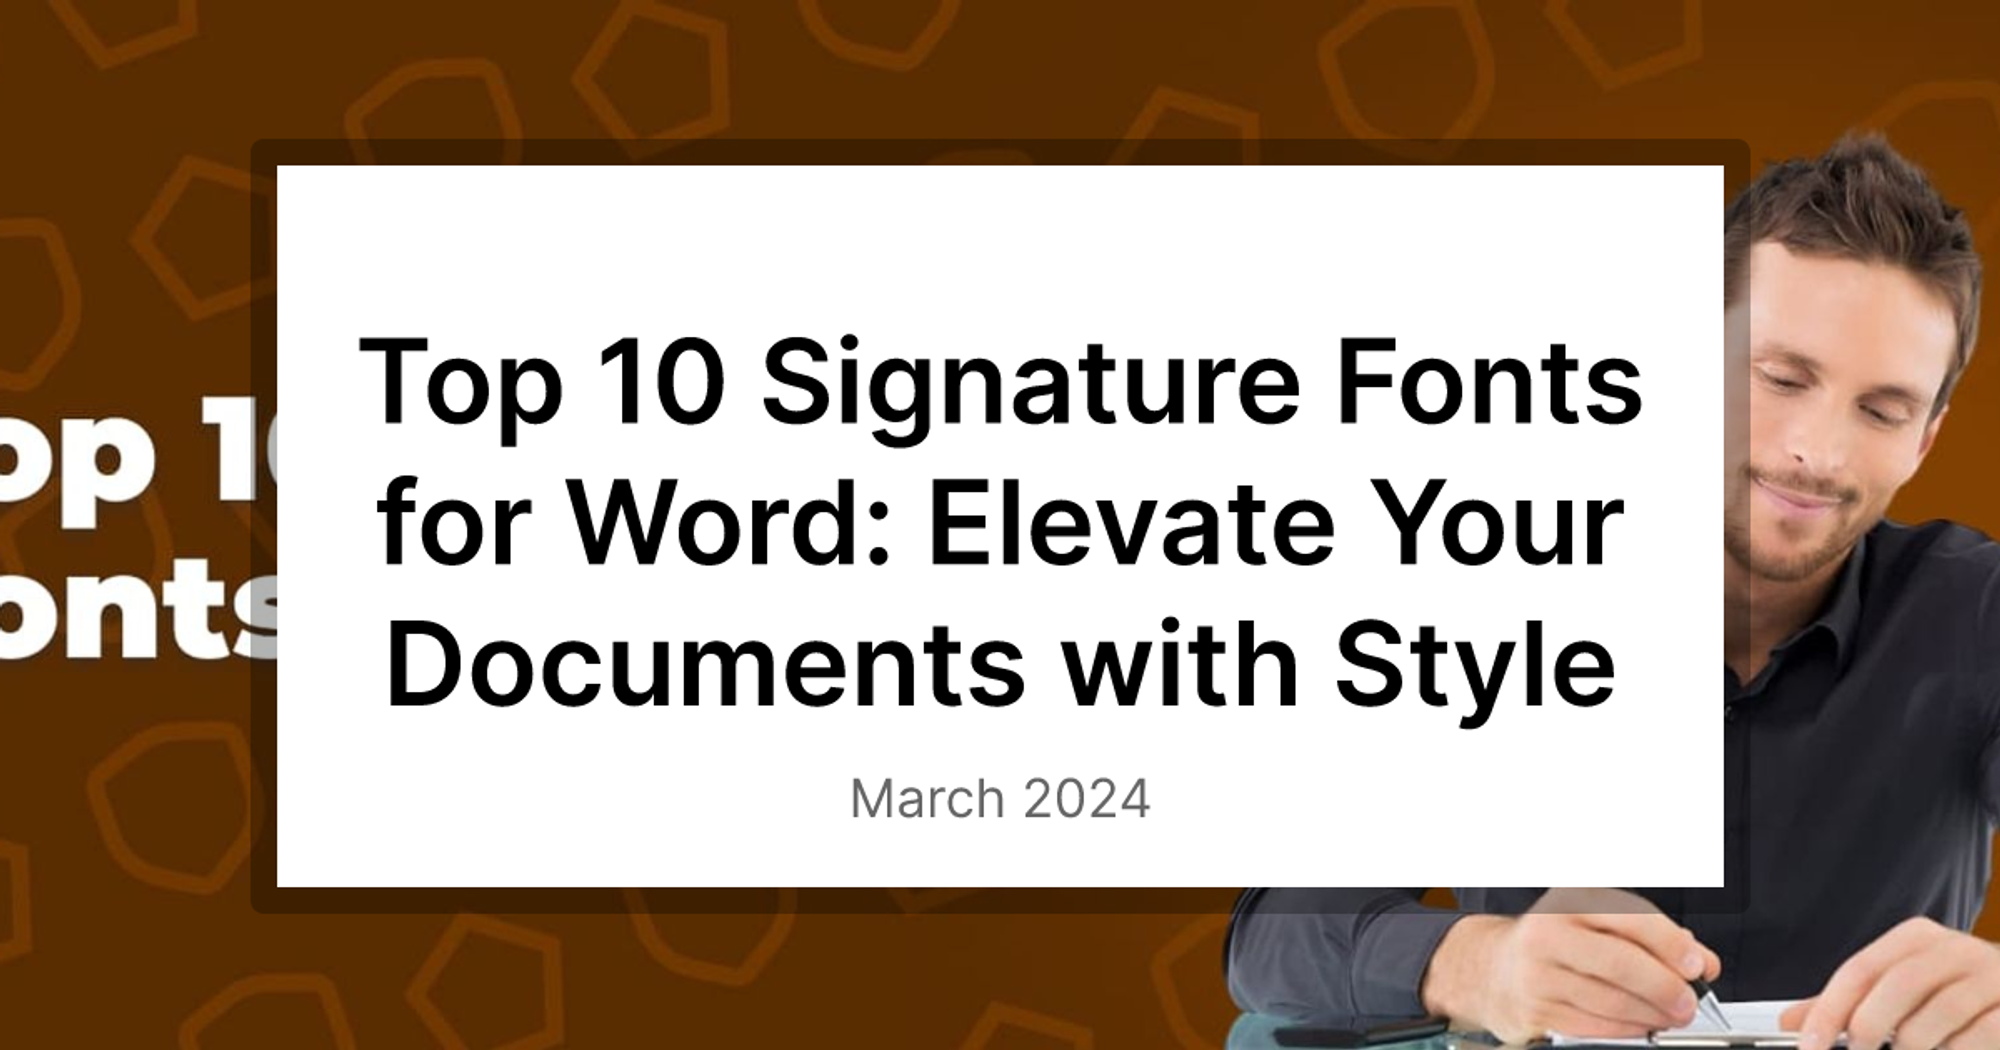 Top 10 Signature Fonts for Word: Elevate Your Documents with Style